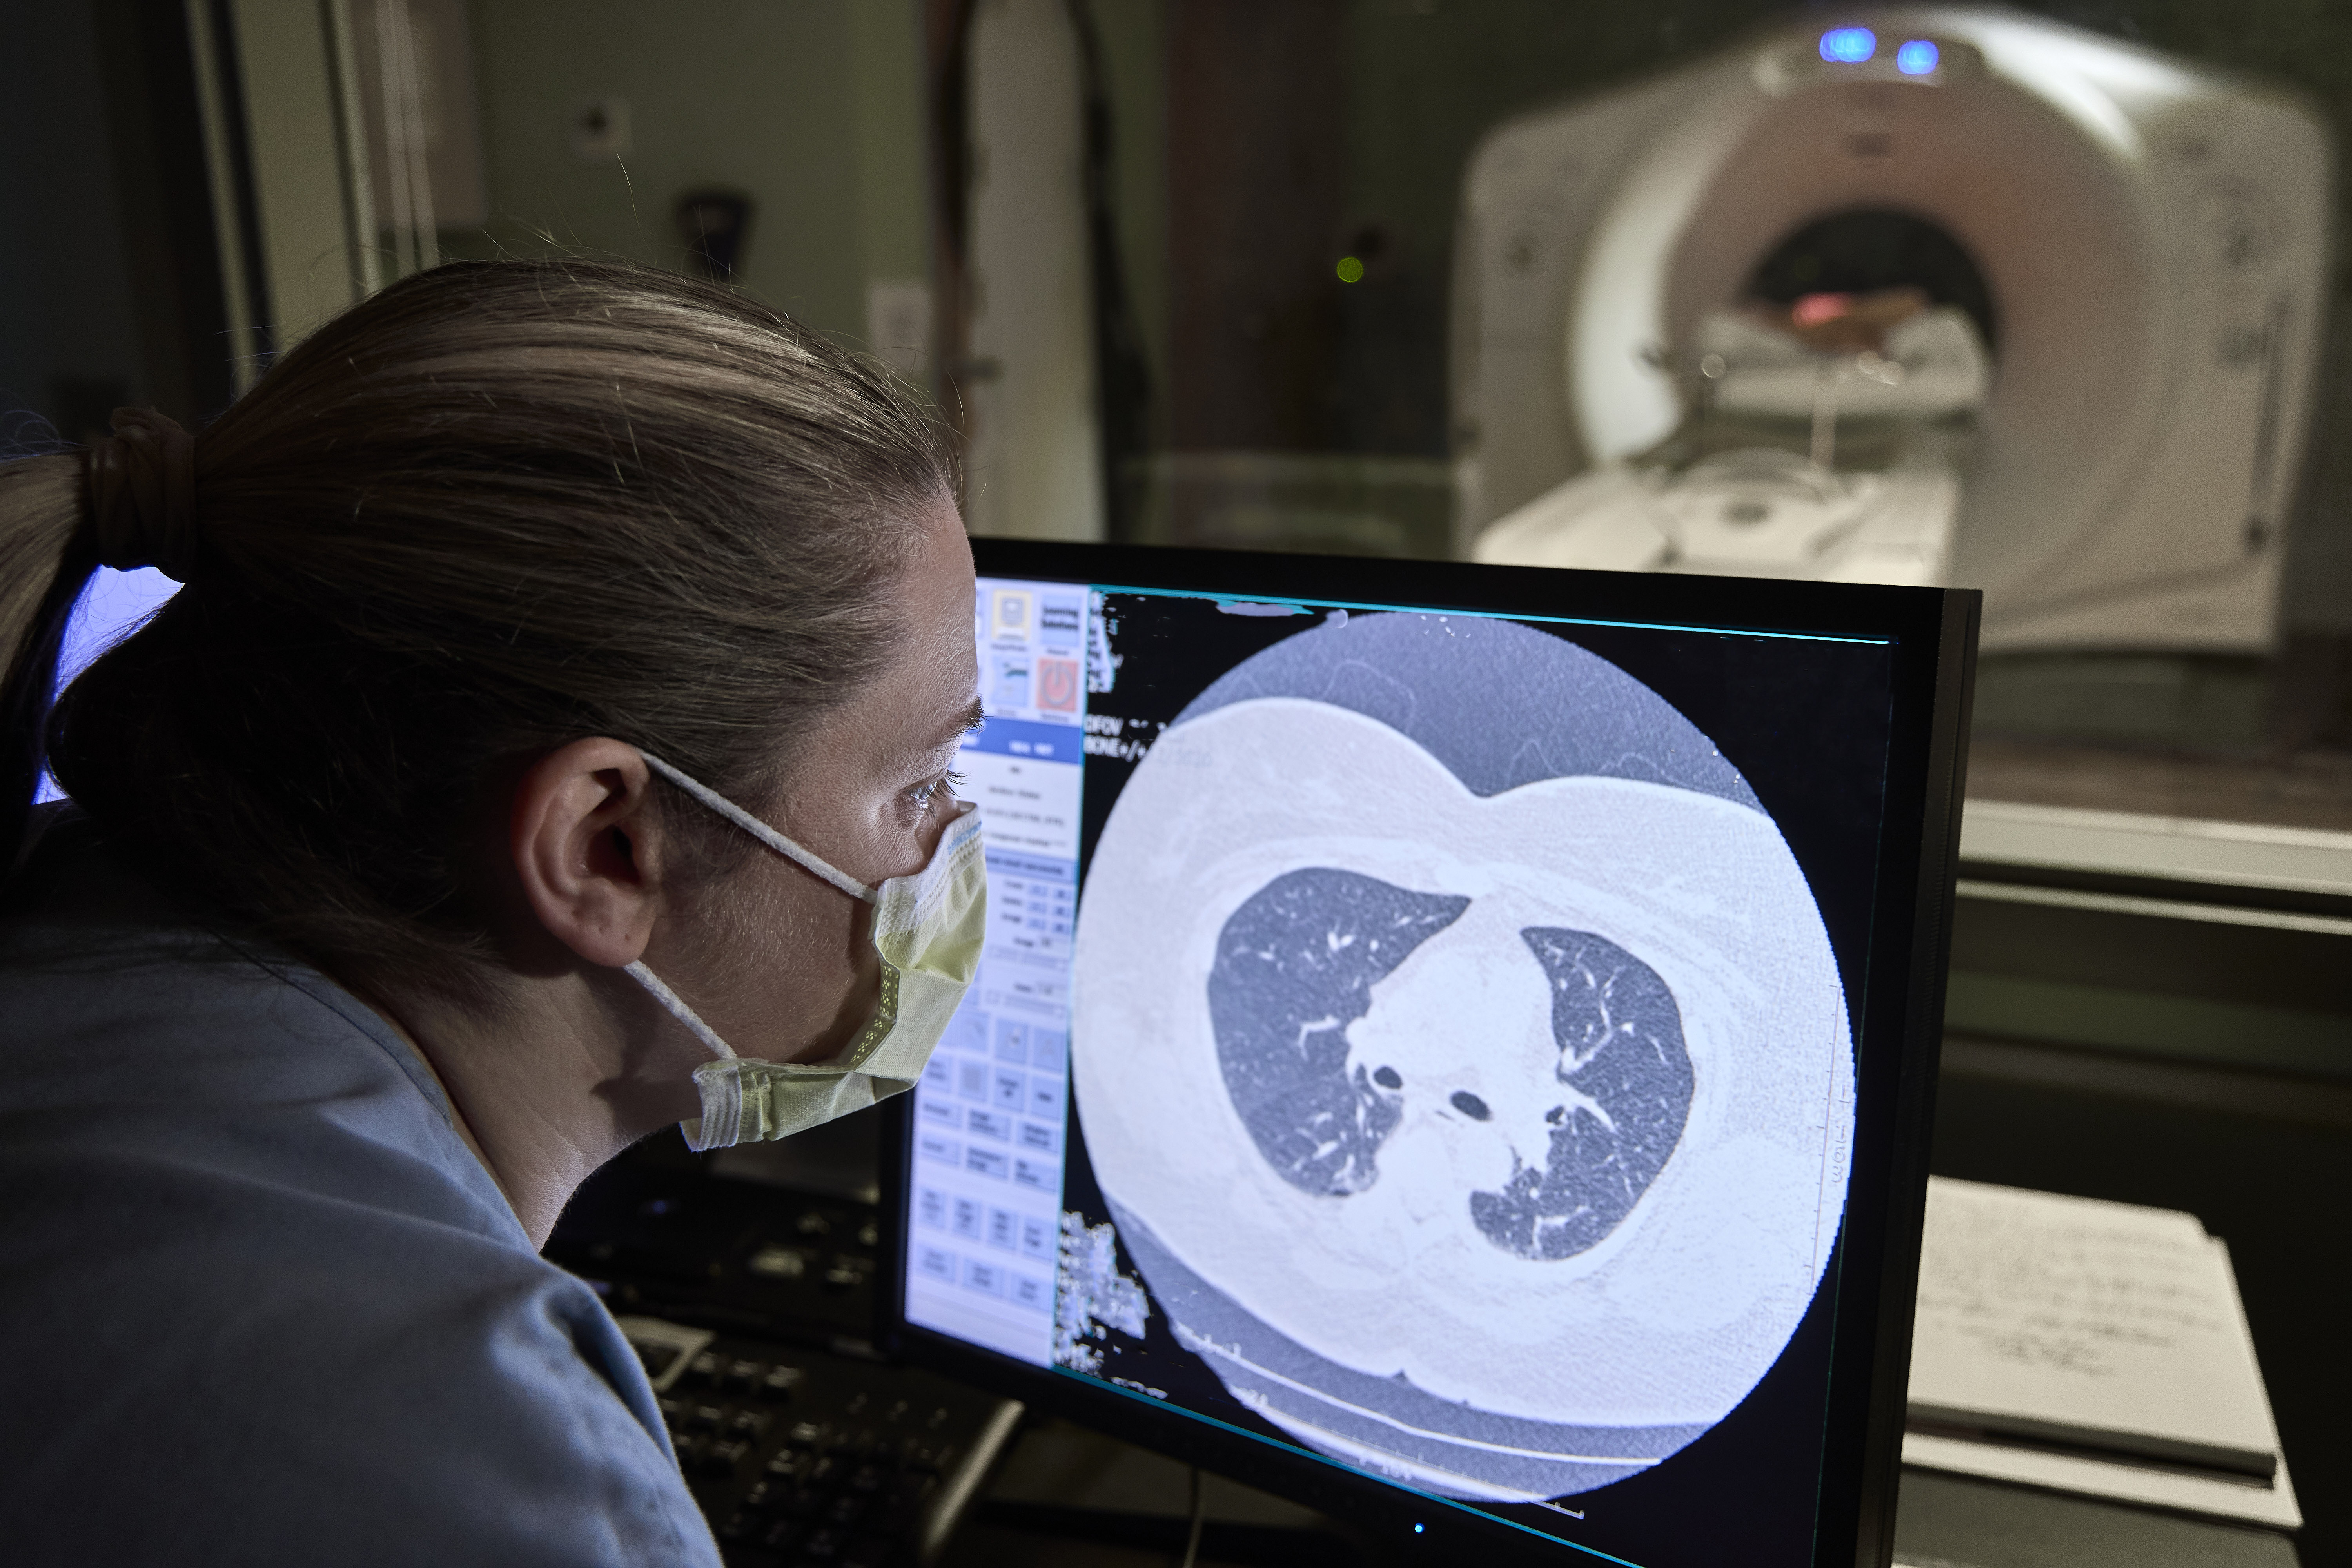 A Temple radiology professional reads a patient's lung scan